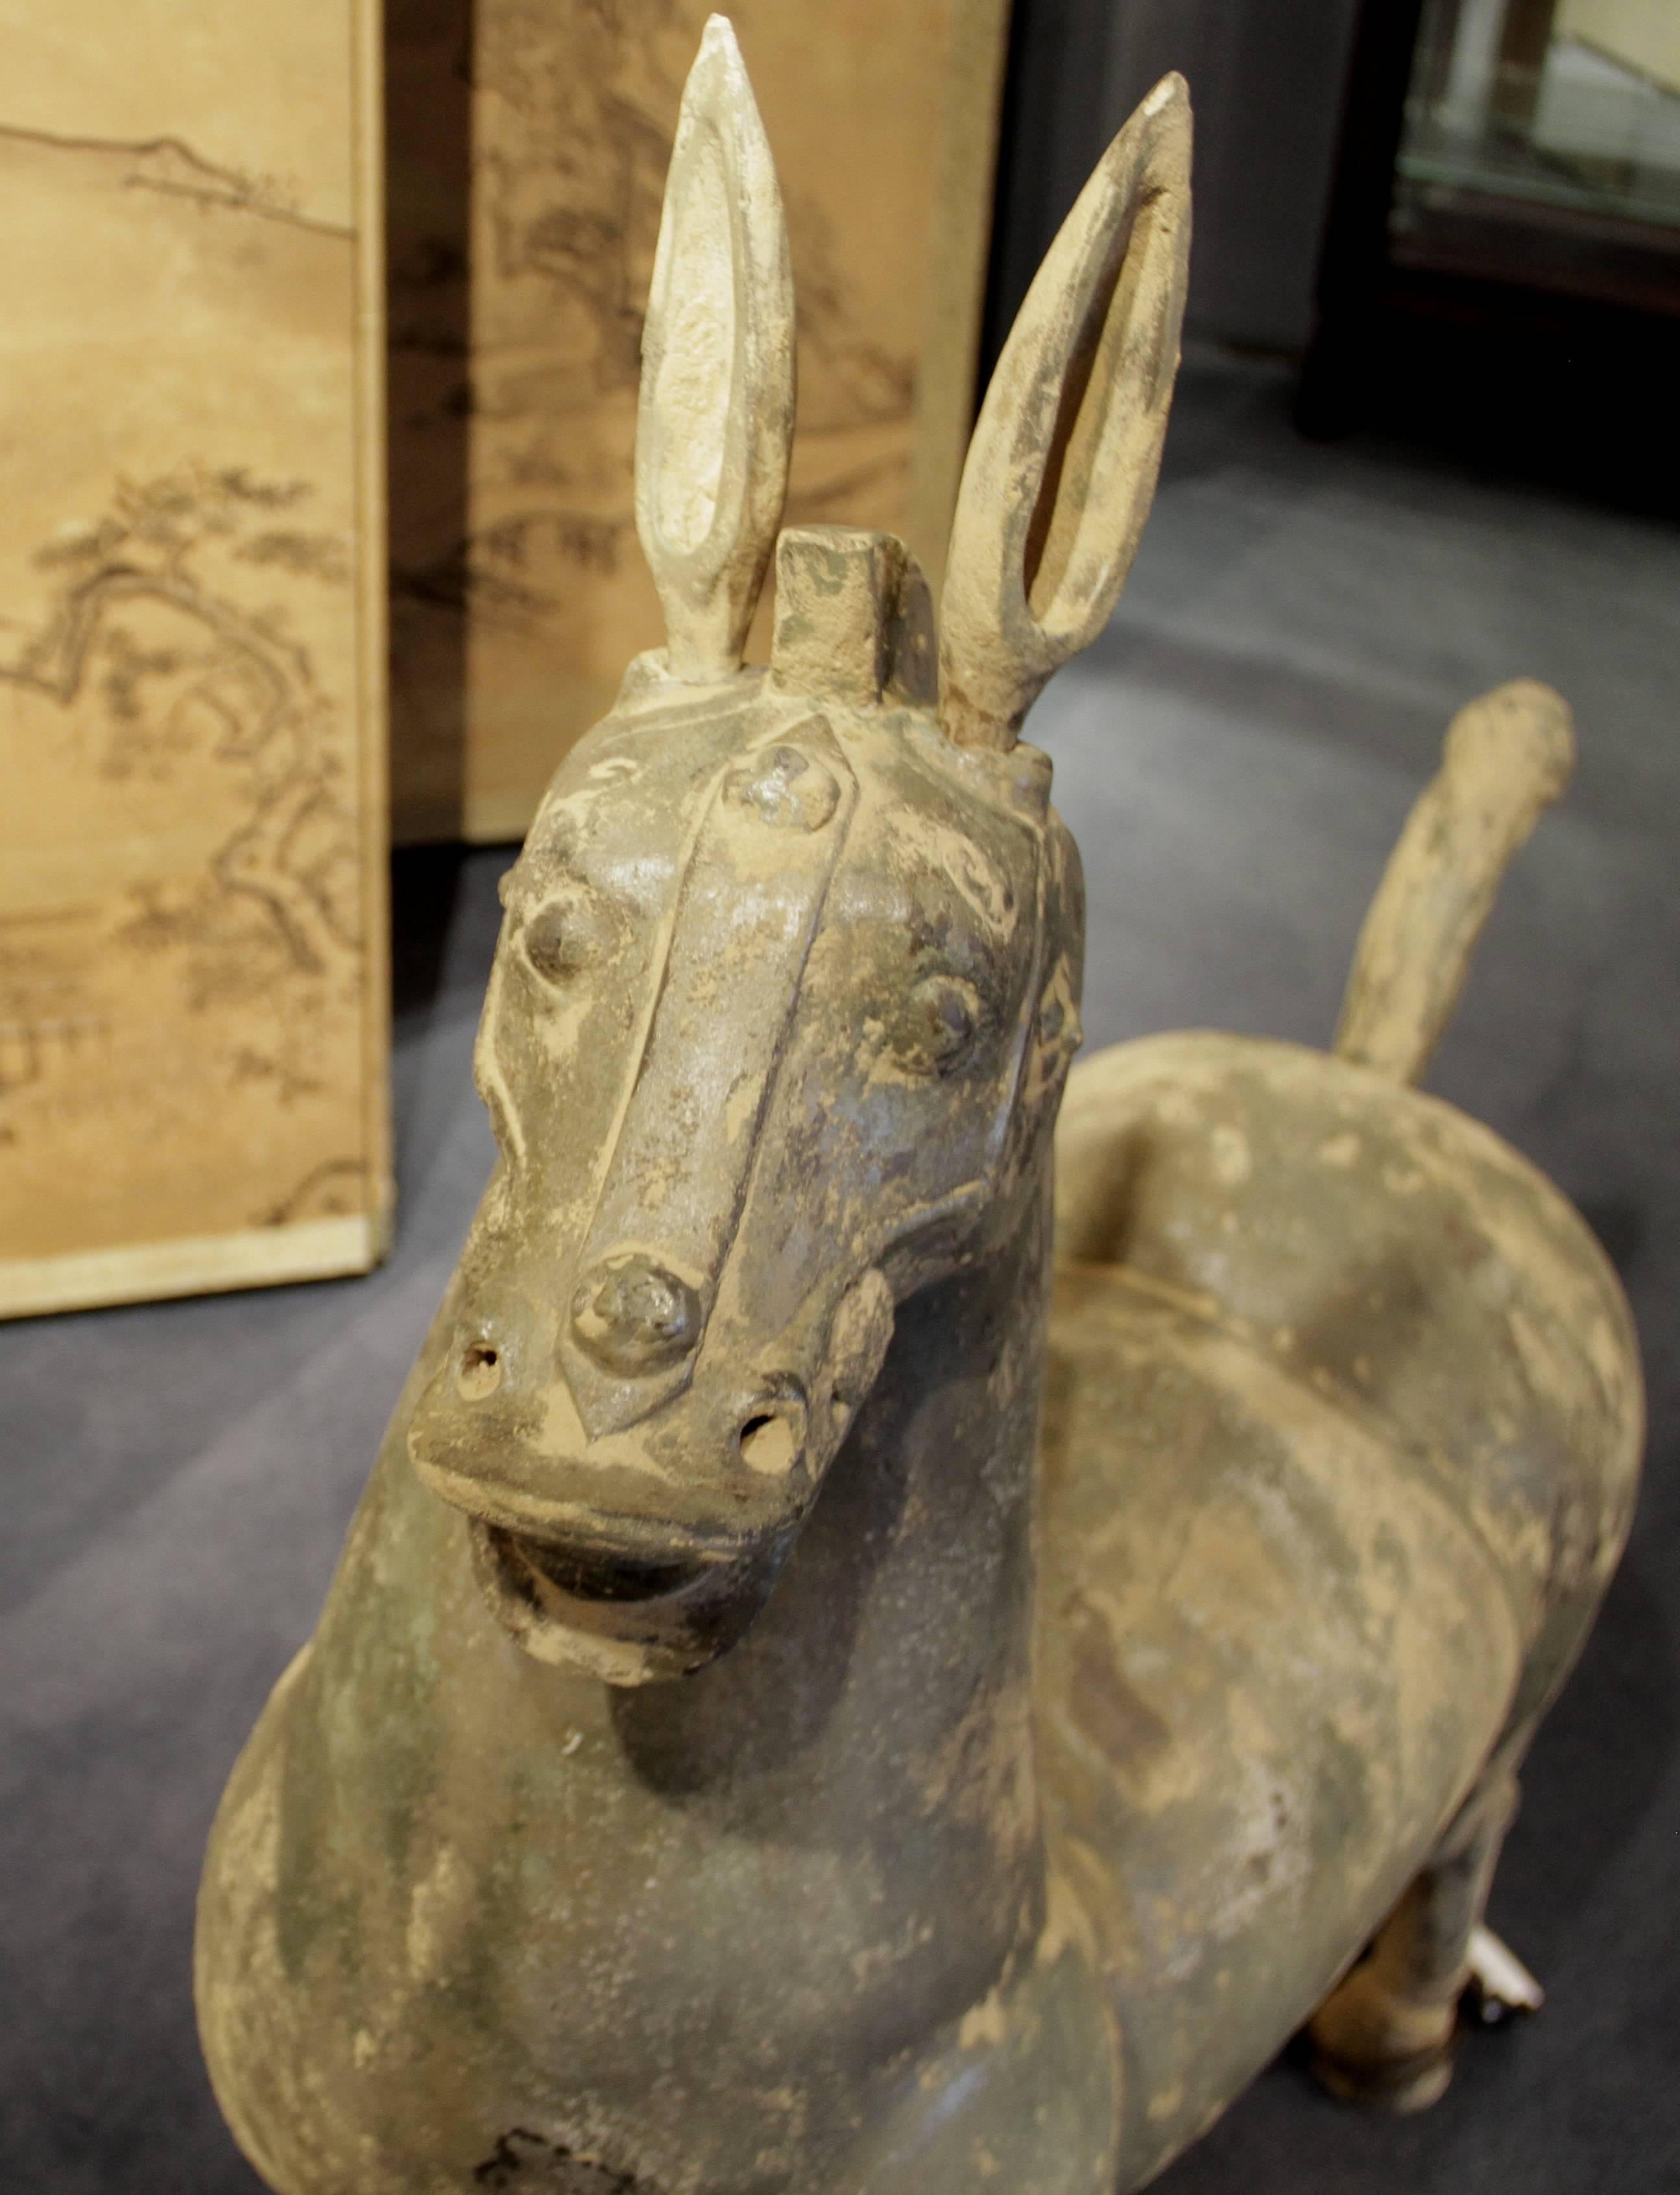 Terra cotta spirit (Mingqui) carriage horse (Mache)

China, Han dynasty (206 BC–AD 220)

Measures: 37 W x 12 D x 47 H

The spirit (mingqui) horse was part of the tomb accouterments for a noble or high-ranking family member. The tomb was filled